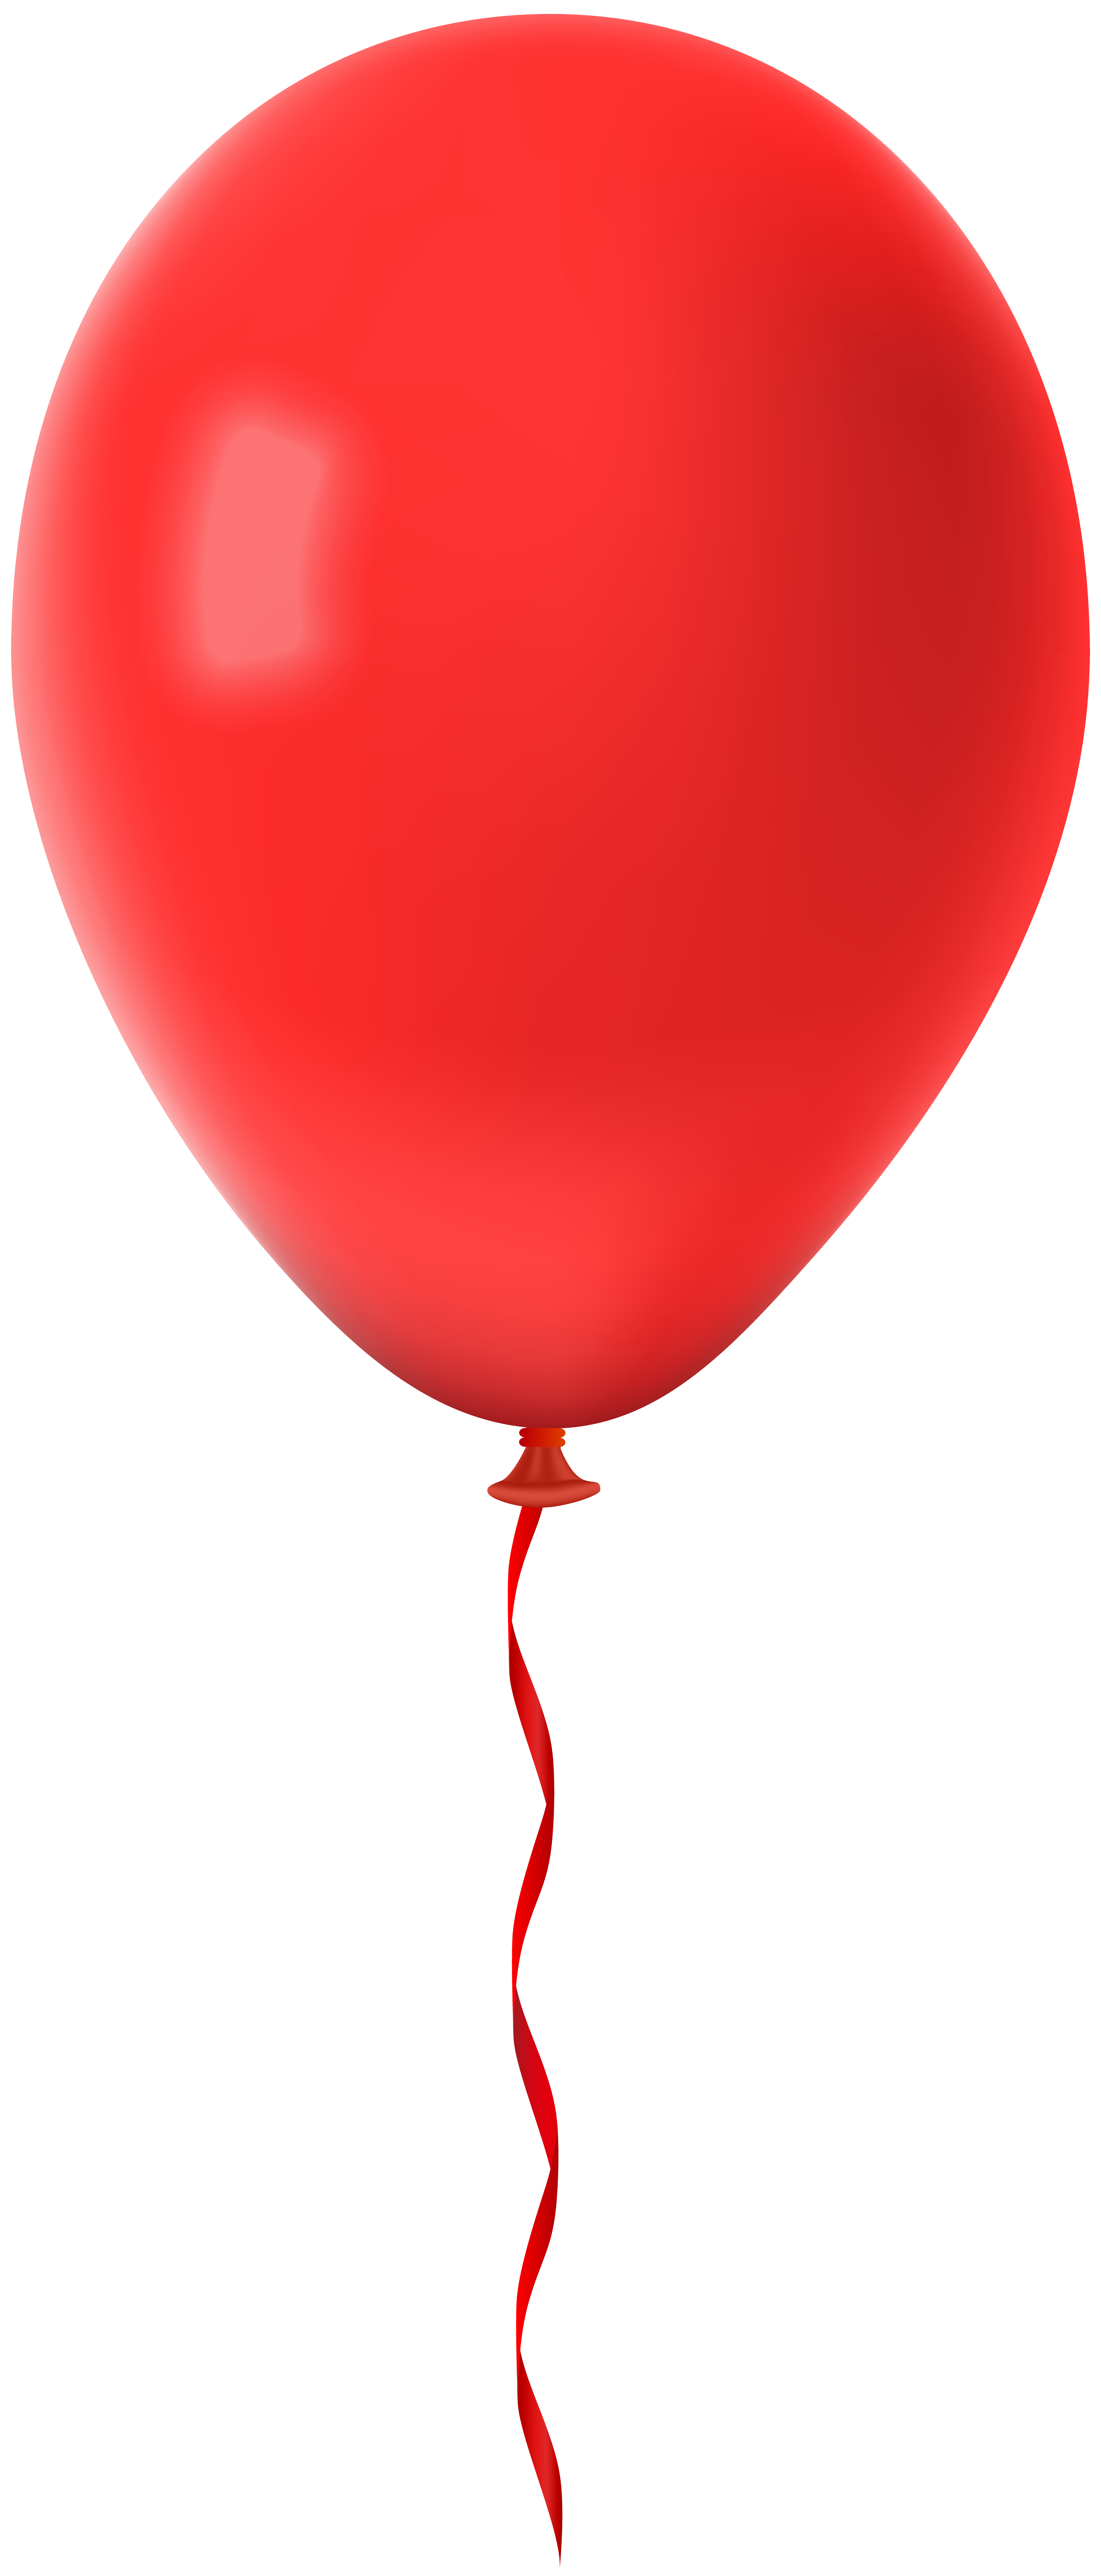 Clip art Balloon Image Openclipart Portable Network Graphics